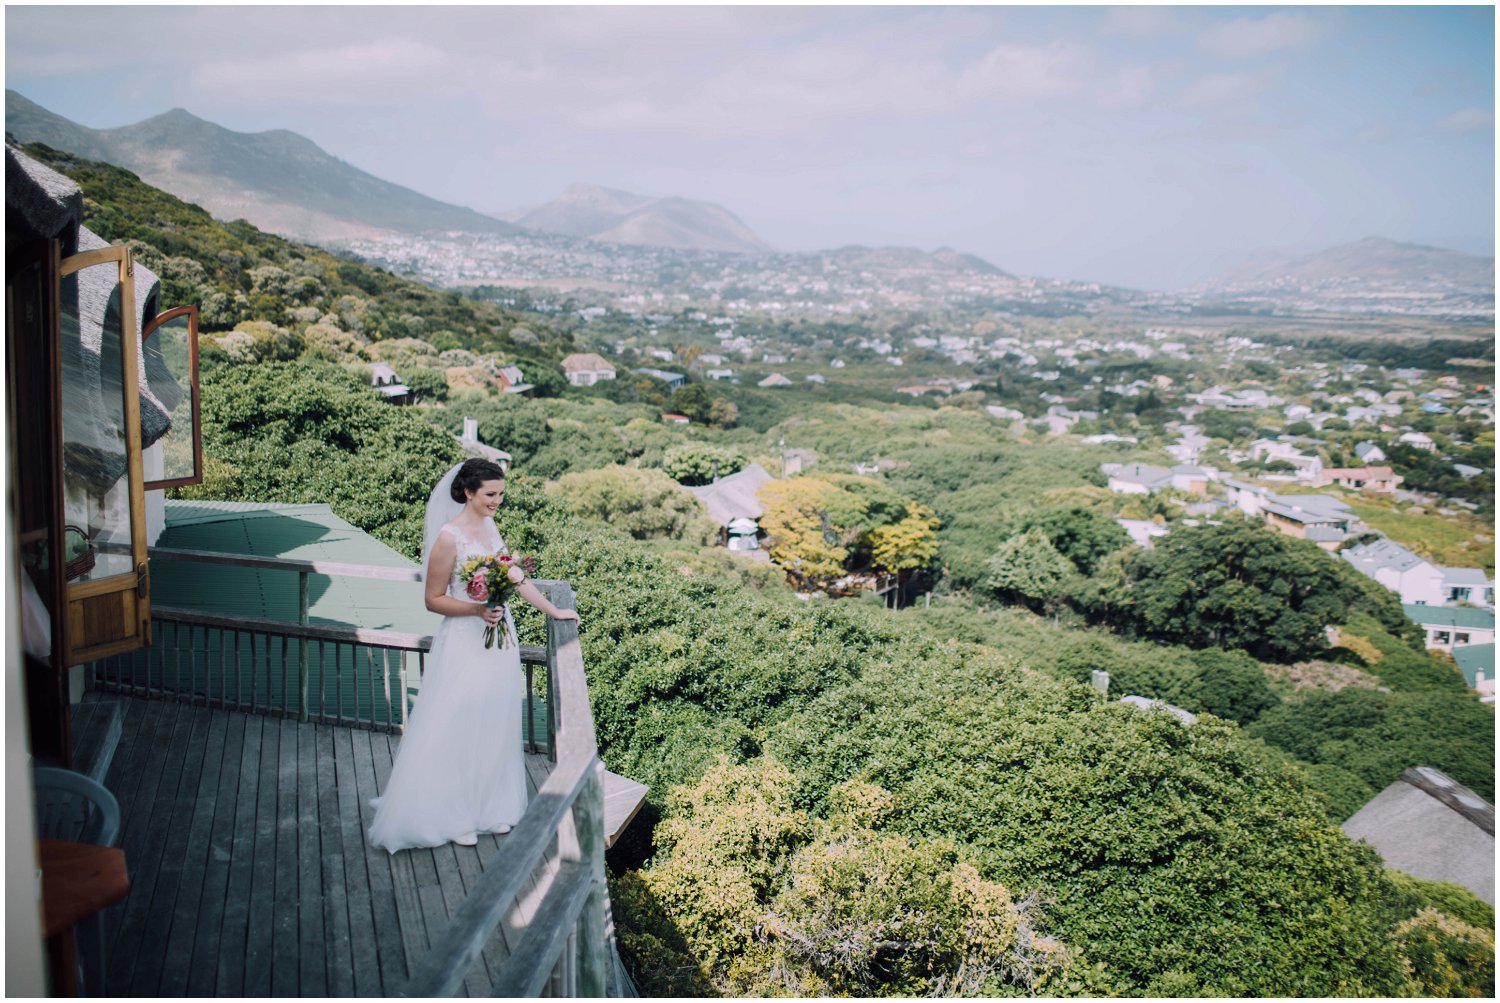 Top Wedding Photographer Cape Town South Africa Artistic Creative Documentary Wedding Photography Rue Kruger_0453.jpg